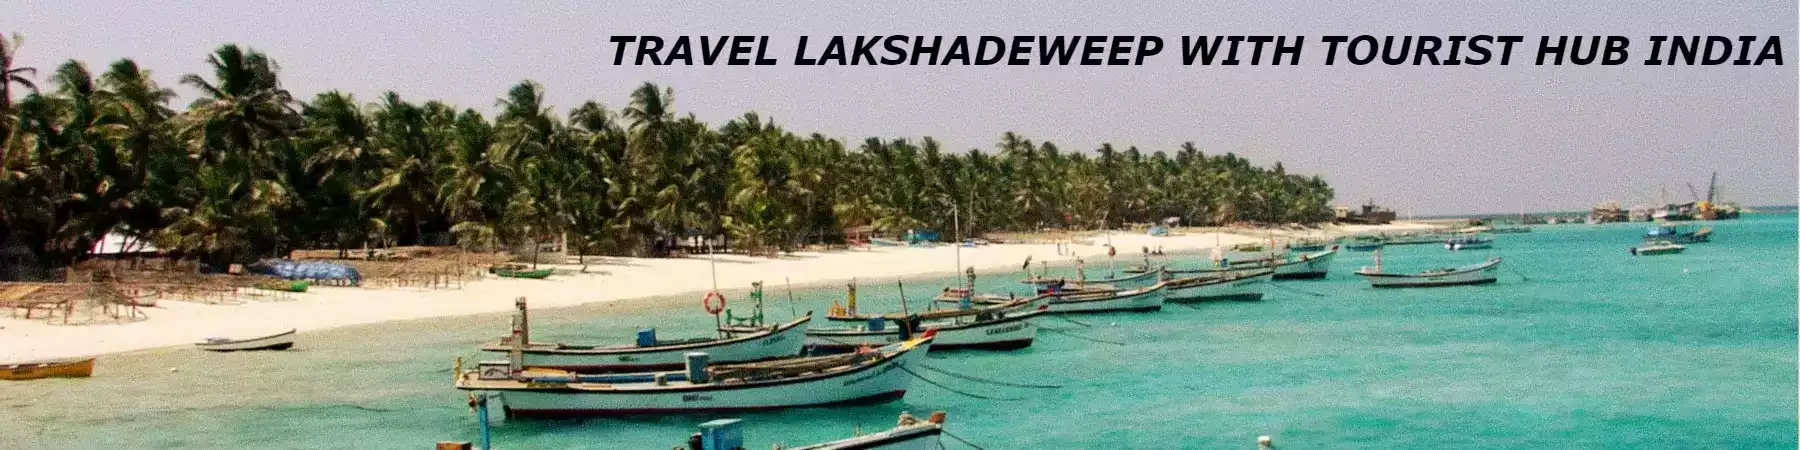 Lakshadweep tourism packages from Bangalore with Tourist Hub India - The Best Lakshadweep Travel Agency